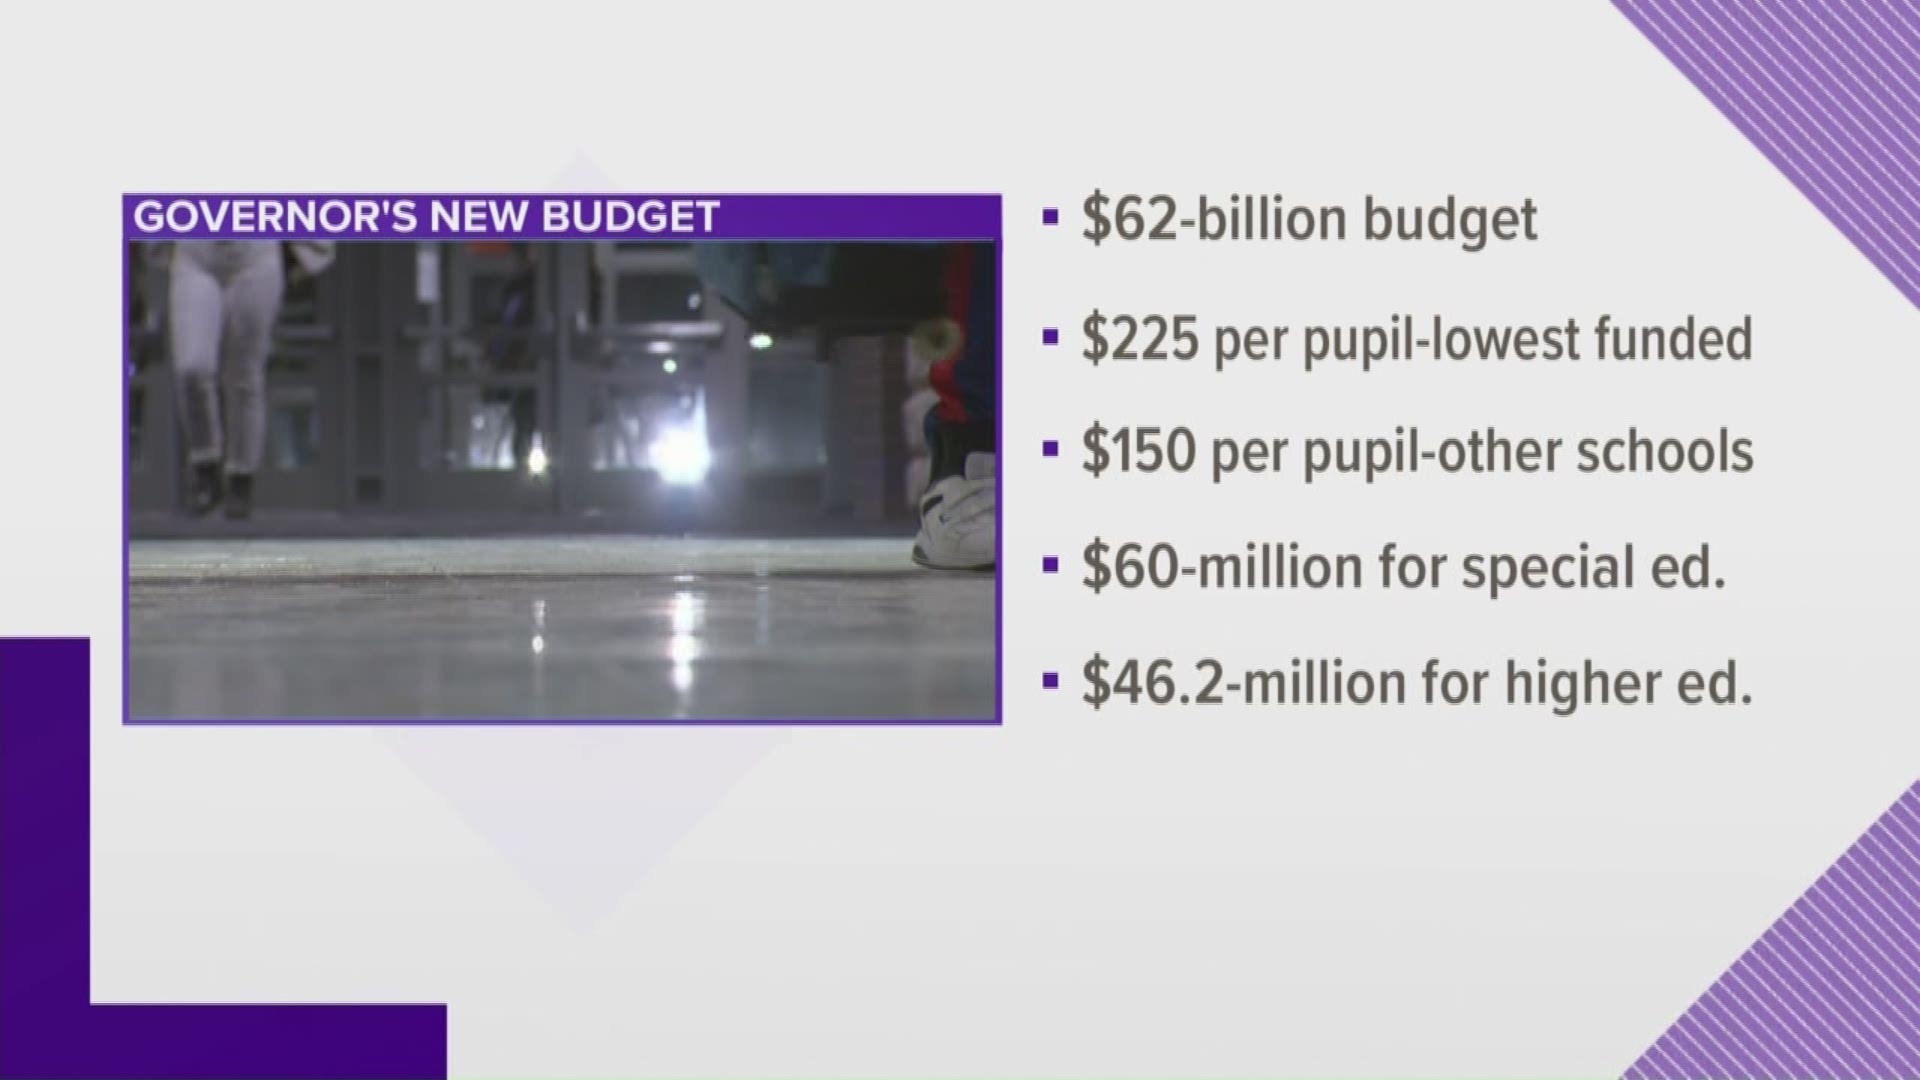 Gov. Gretchen Whitmer unveiled her 2021 fiscal year budget Thursday at a roundtable in Lansing.